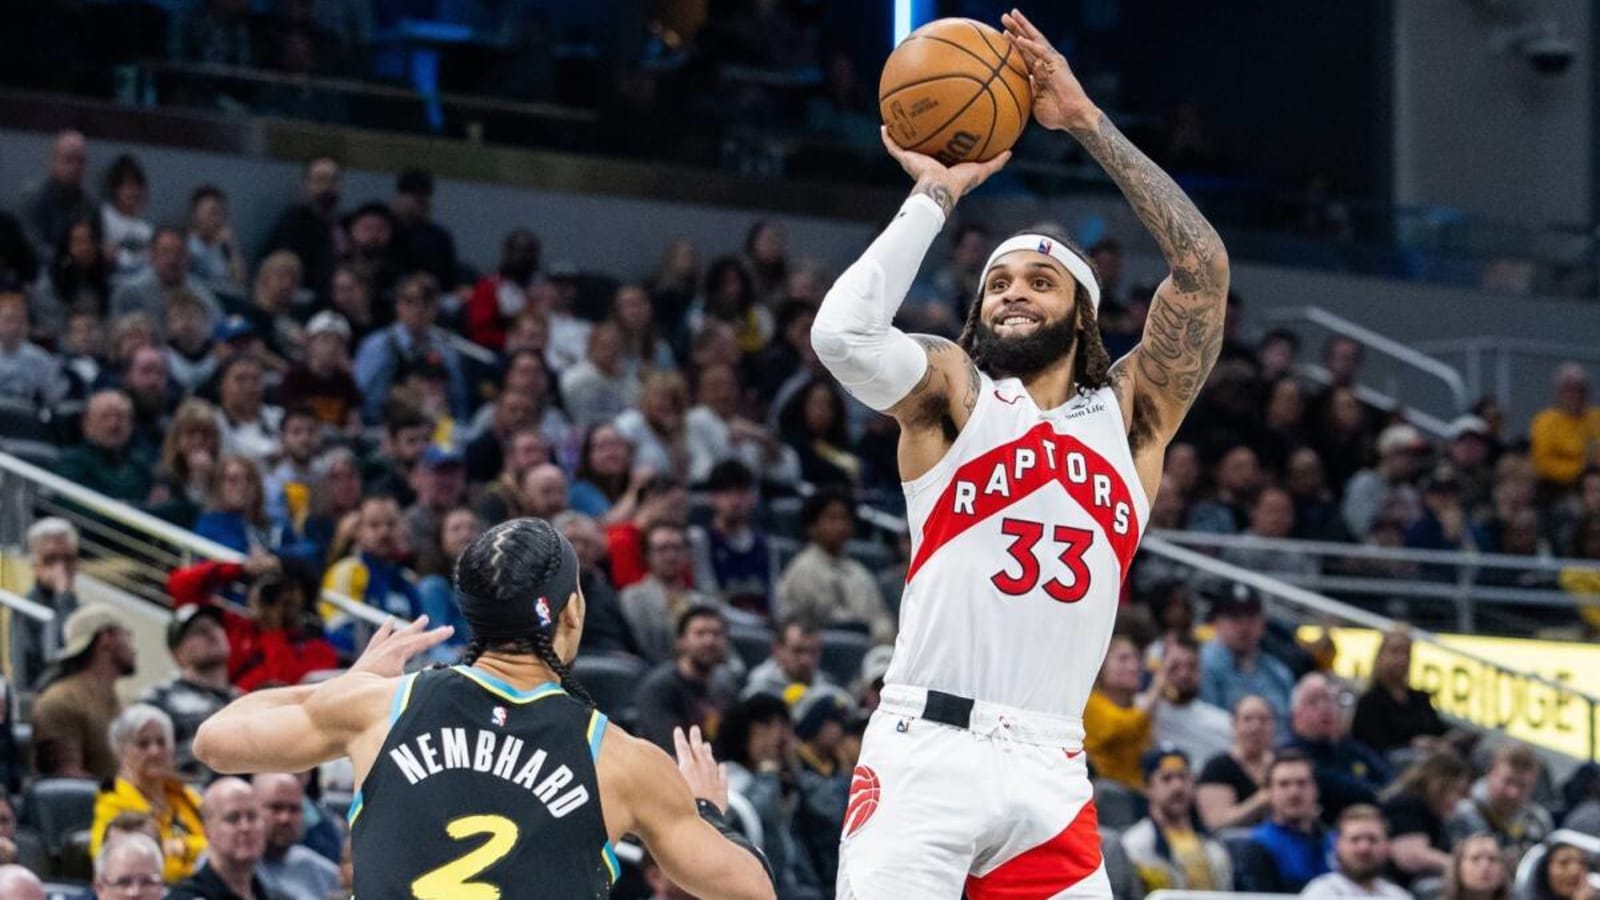 Raptors Heading for Intriguing Offseason With Gary Trent Jr.